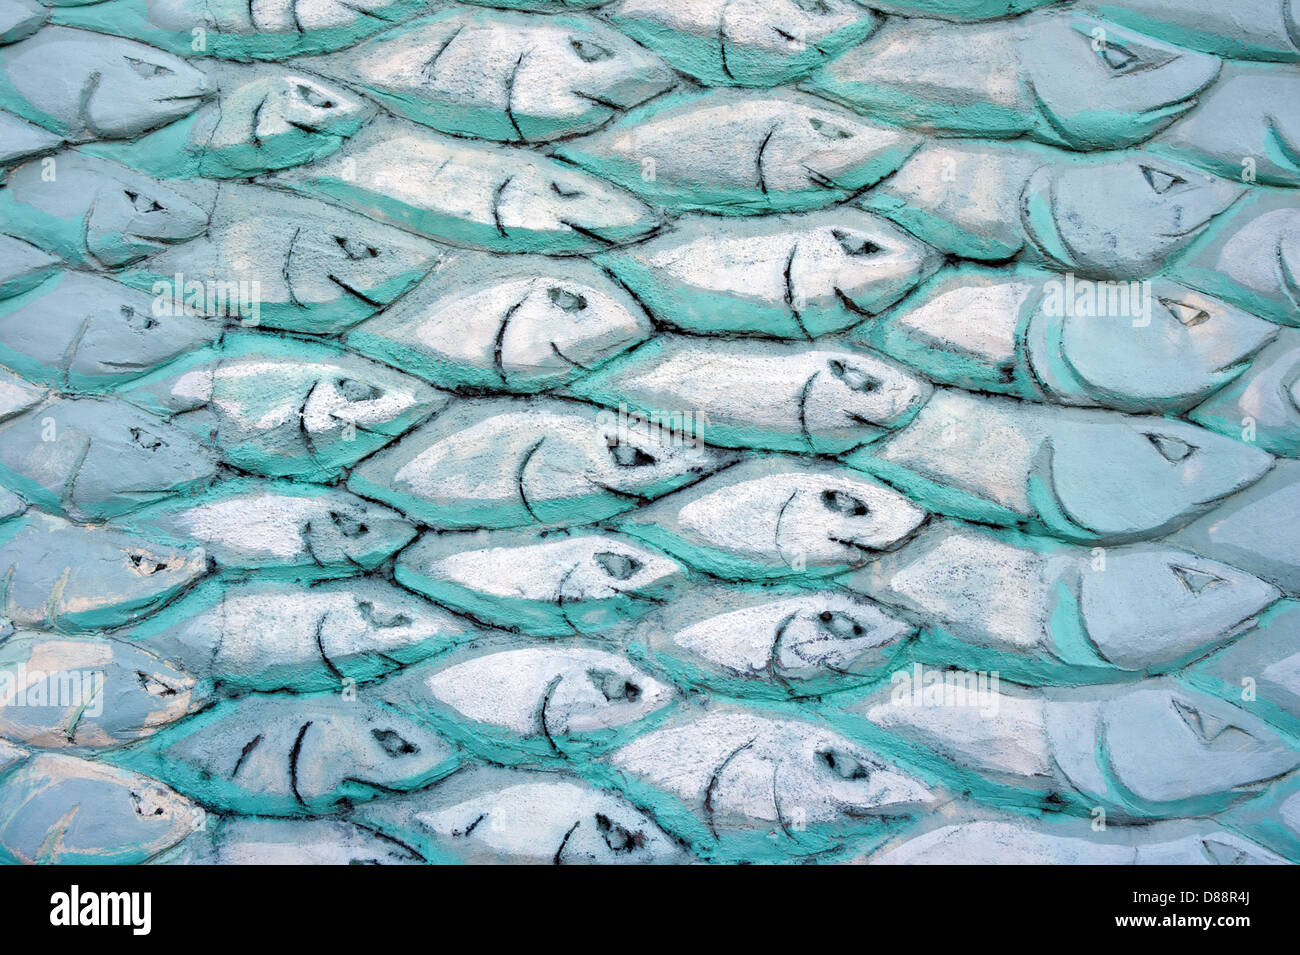 A shoal of fish carved in plaster on a wall and painted with tones of blue, green and turquoise. Stock Photo